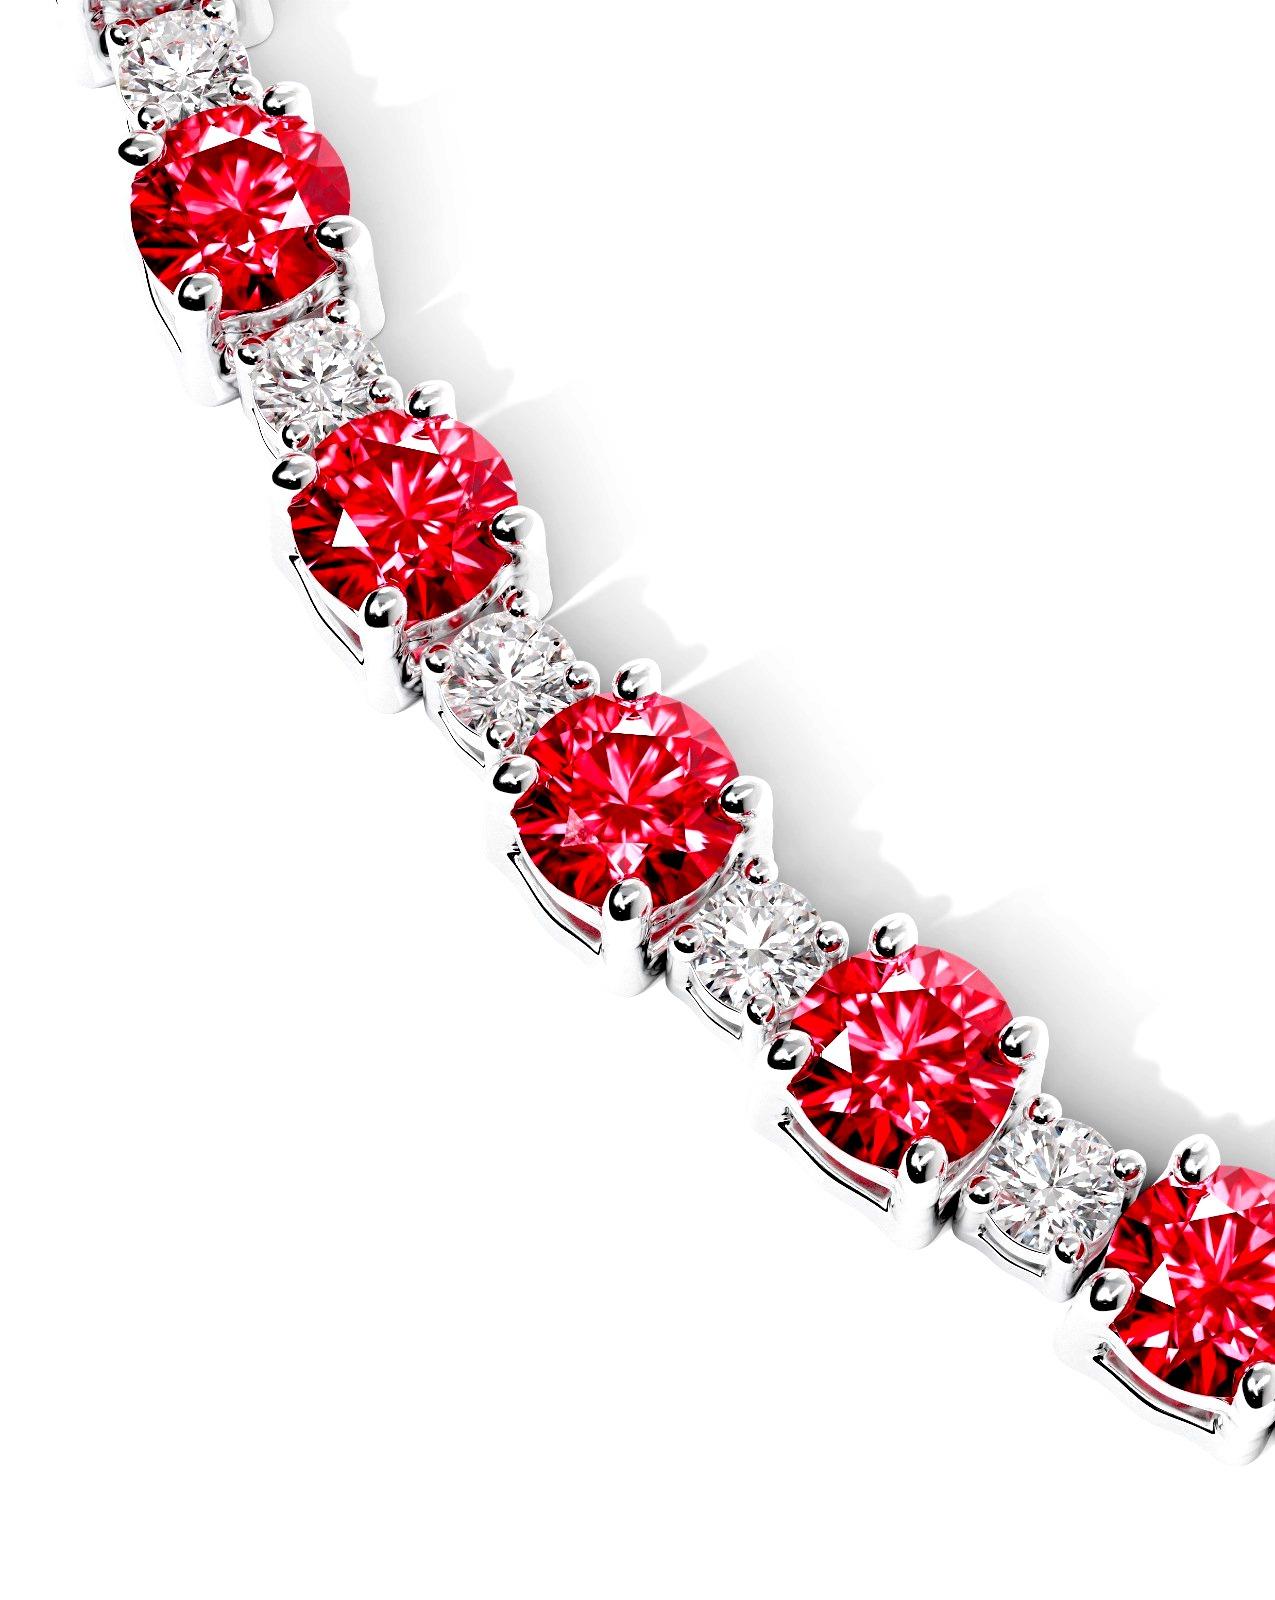 Elegance and allure intertwine in our Ruby and Diamond Necklace, a stunning creation that captures the essence of sophistication. Twelve carats of Natural Round Rubies, sourced from Burma, boast a vibrant red hue without any inclusions, radiating